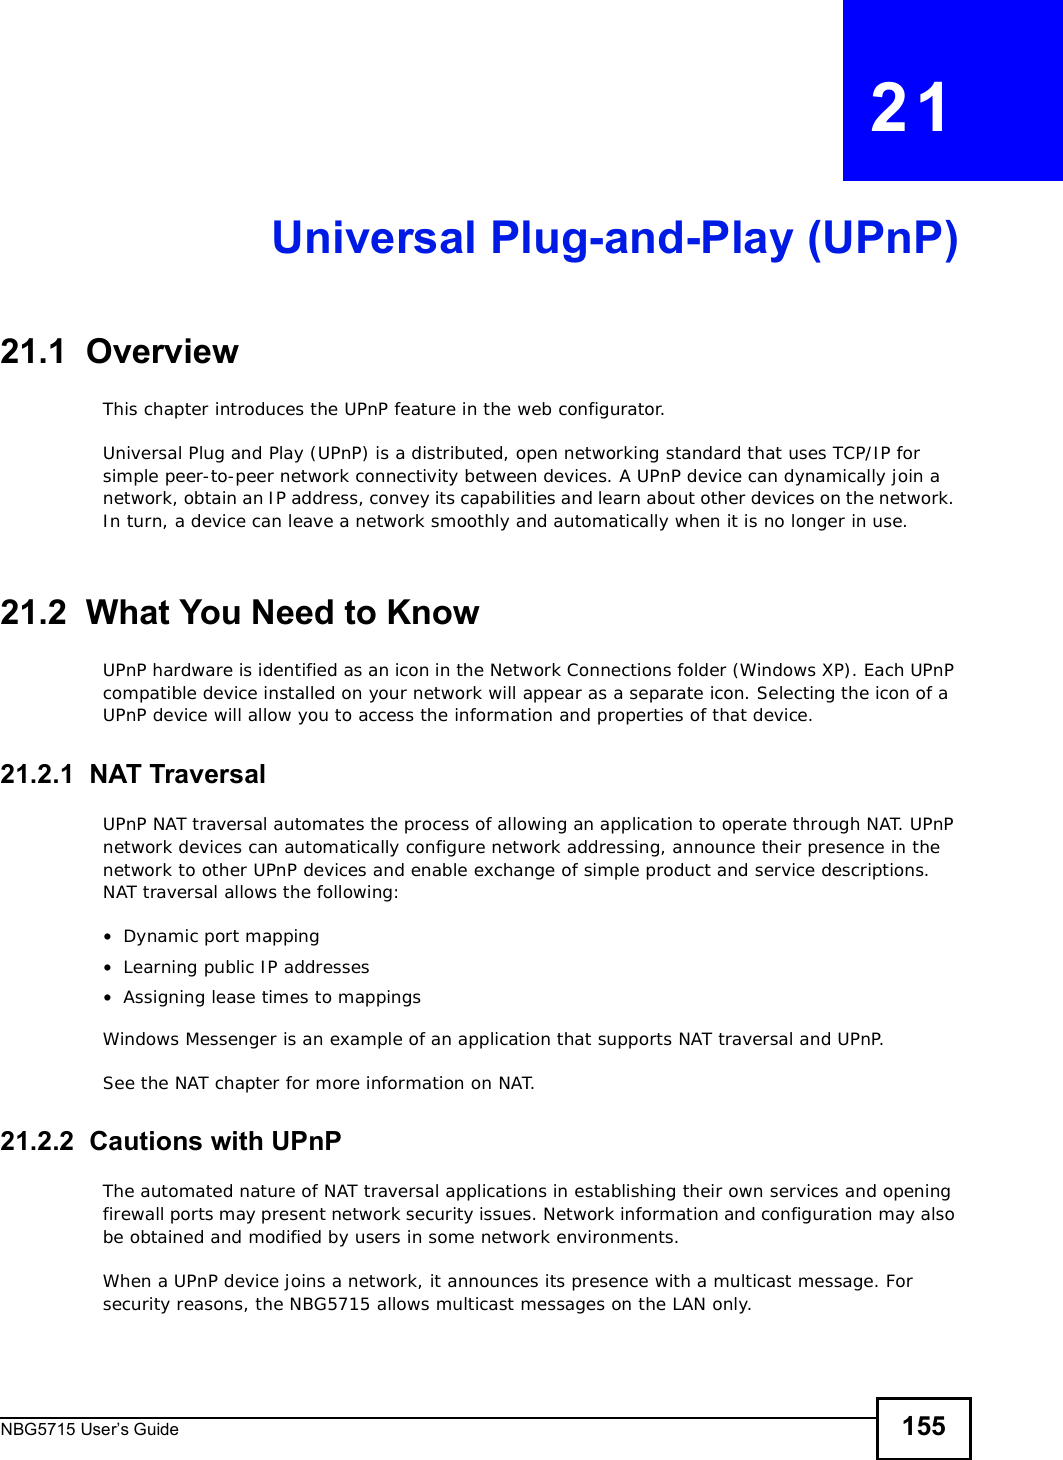 NBG5715 User’s Guide 155CHAPTER   21Universal Plug-and-Play (UPnP)21.1  Overview This chapter introduces the UPnP feature in the web configurator.Universal Plug and Play (UPnP) is a distributed, open networking standard that uses TCP/IP for simple peer-to-peer network connectivity between devices. A UPnP device can dynamically join a network, obtain an IP address, convey its capabilities and learn about other devices on the network. In turn, a device can leave a network smoothly and automatically when it is no longer in use.21.2  What You Need to KnowUPnP hardware is identified as an icon in the Network Connections folder (Windows XP). Each UPnP compatible device installed on your network will appear as a separate icon. Selecting the icon of a UPnP device will allow you to access the information and properties of that device. 21.2.1  NAT TraversalUPnP NAT traversal automates the process of allowing an application to operate through NAT. UPnP network devices can automatically configure network addressing, announce their presence in the network to other UPnP devices and enable exchange of simple product and service descriptions. NAT traversal allows the following:•Dynamic port mapping•Learning public IP addresses•Assigning lease times to mappingsWindows Messenger is an example of an application that supports NAT traversal and UPnP. See the NAT chapter for more information on NAT.21.2.2  Cautions with UPnPThe automated nature of NAT traversal applications in establishing their own services and opening firewall ports may present network security issues. Network information and configuration may also be obtained and modified by users in some network environments. When a UPnP device joins a network, it announces its presence with a multicast message. For security reasons, the NBG5715 allows multicast messages on the LAN only.